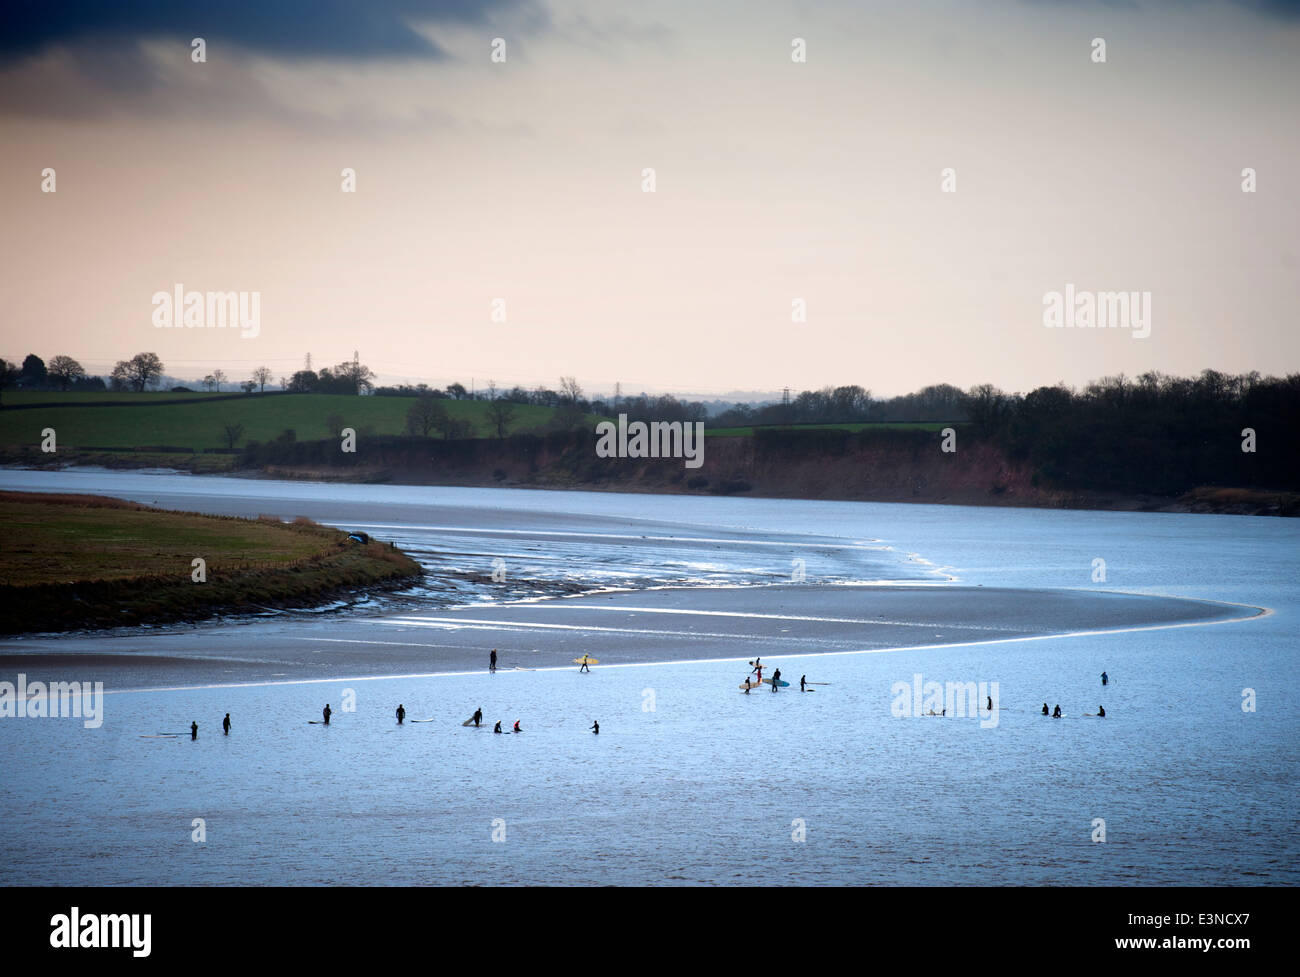 Surfers and canoeists waiting for the approaching Severn Bore tidal wave at Newnham-on-Severn, Gloucestershire UK 2014 Stock Photo